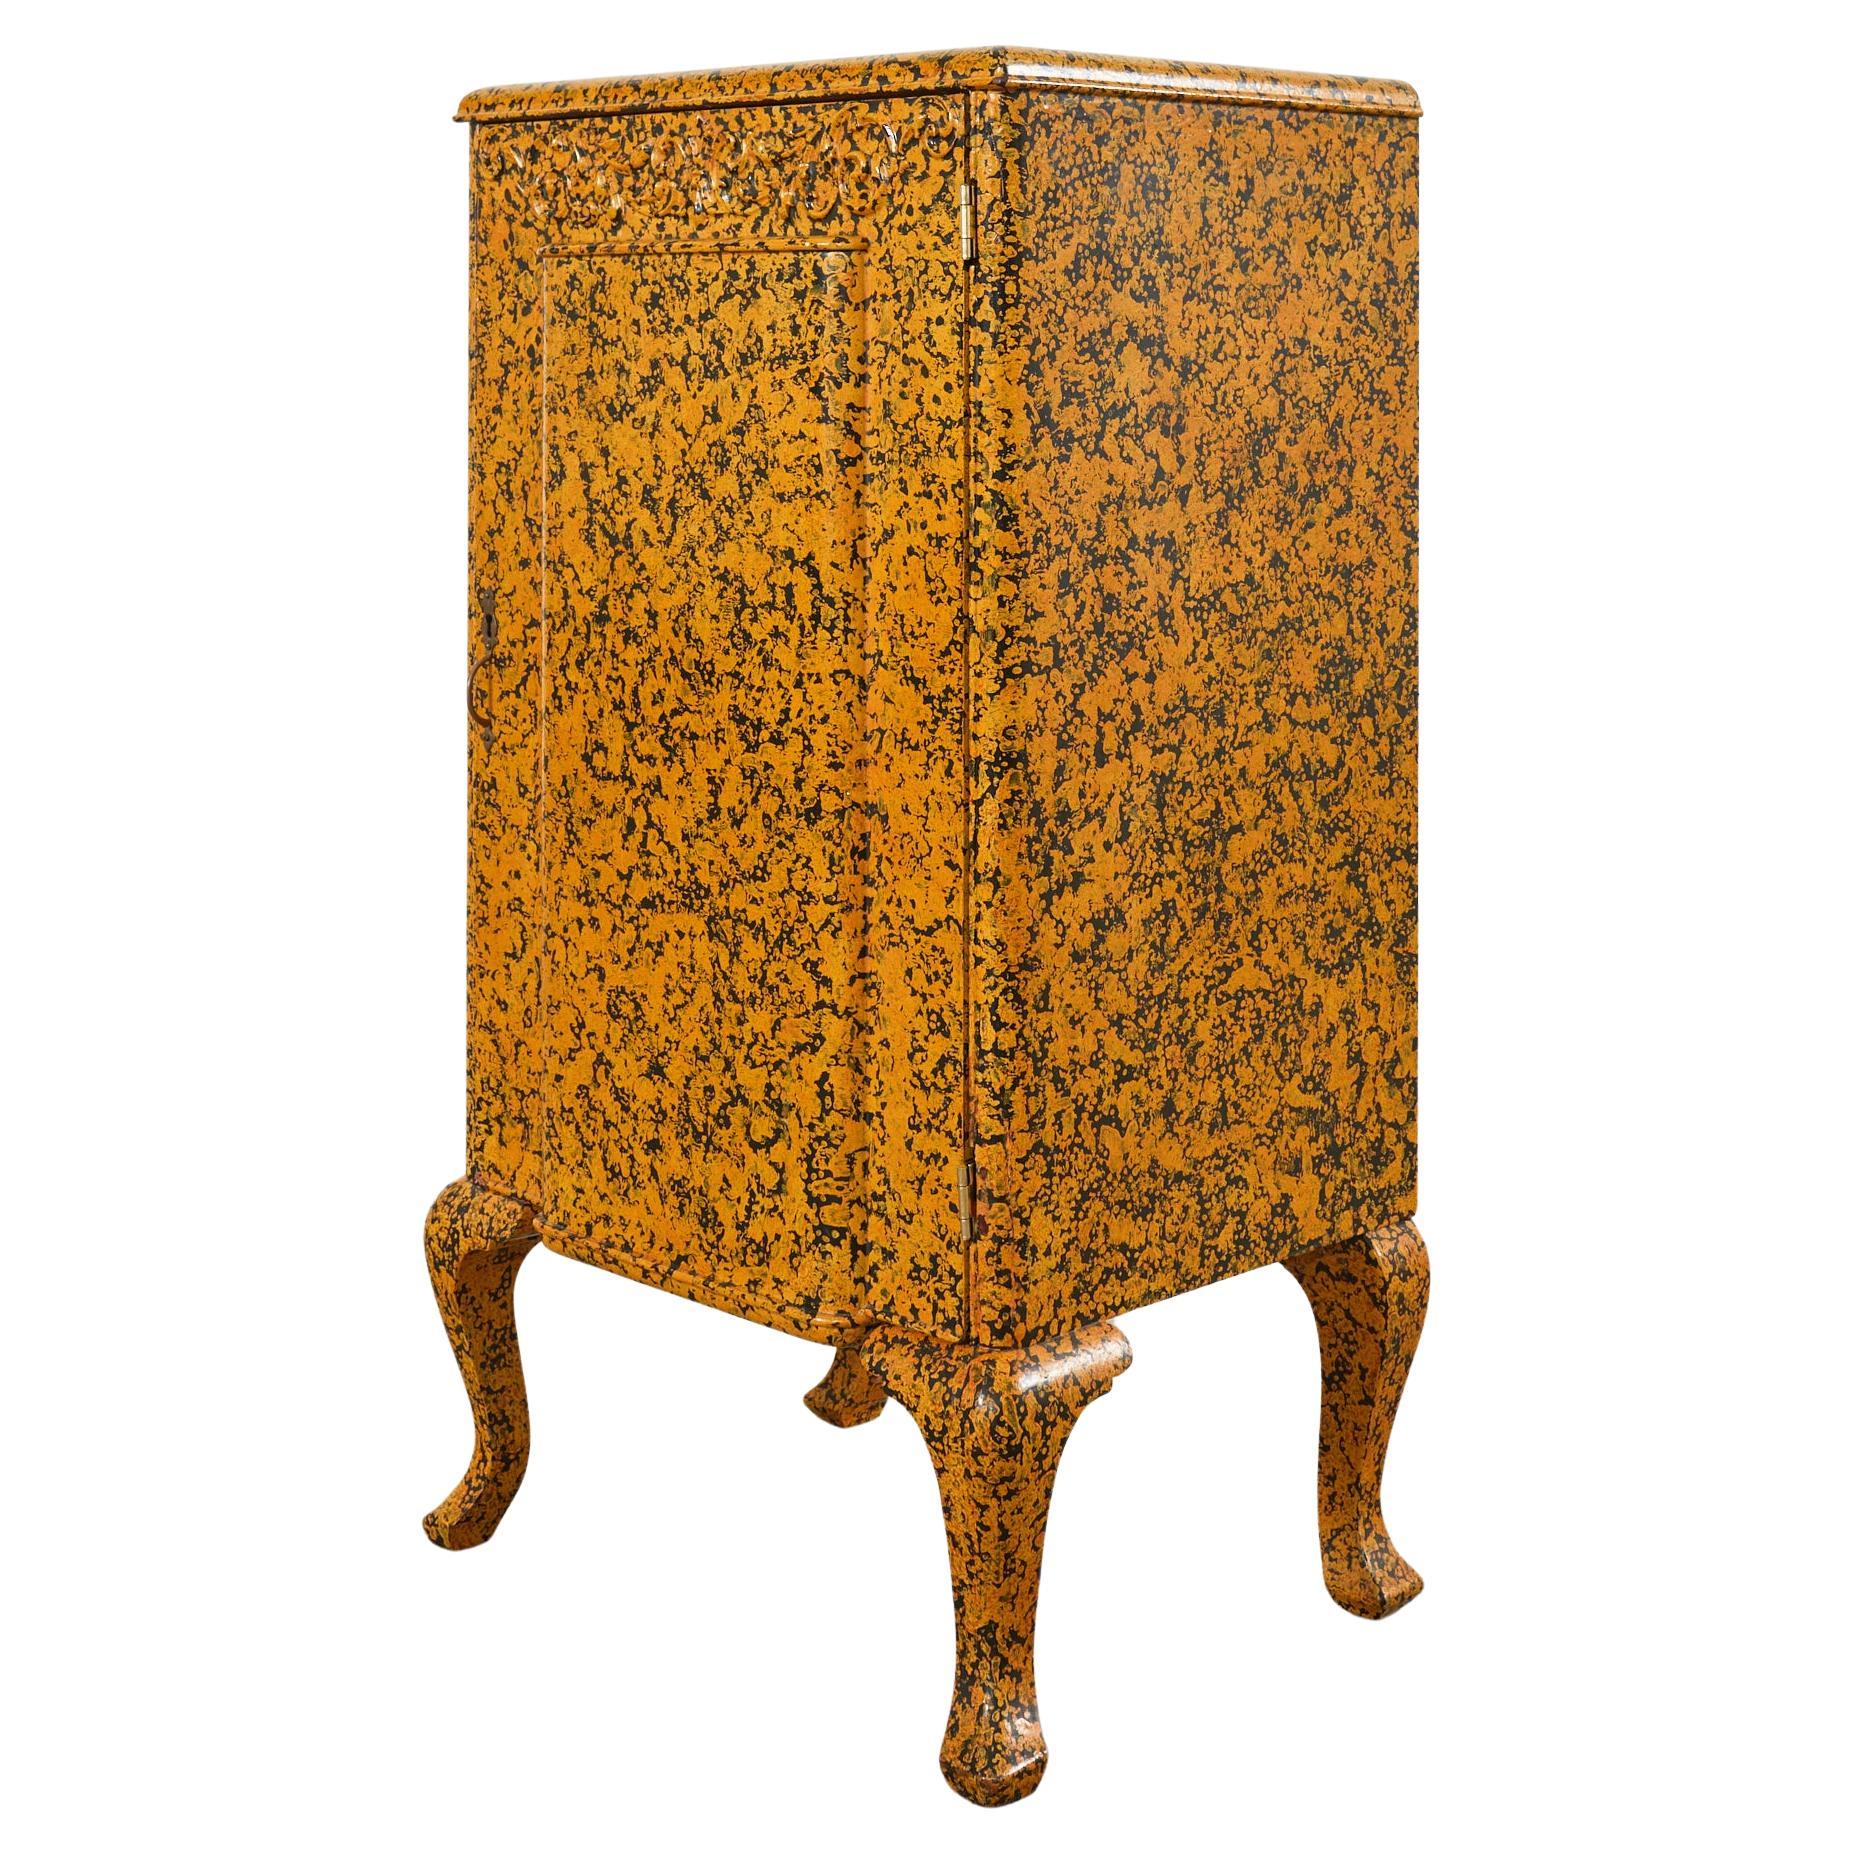 Queen Anne Style Cupboard Mustard Speckled by Ira Yeager